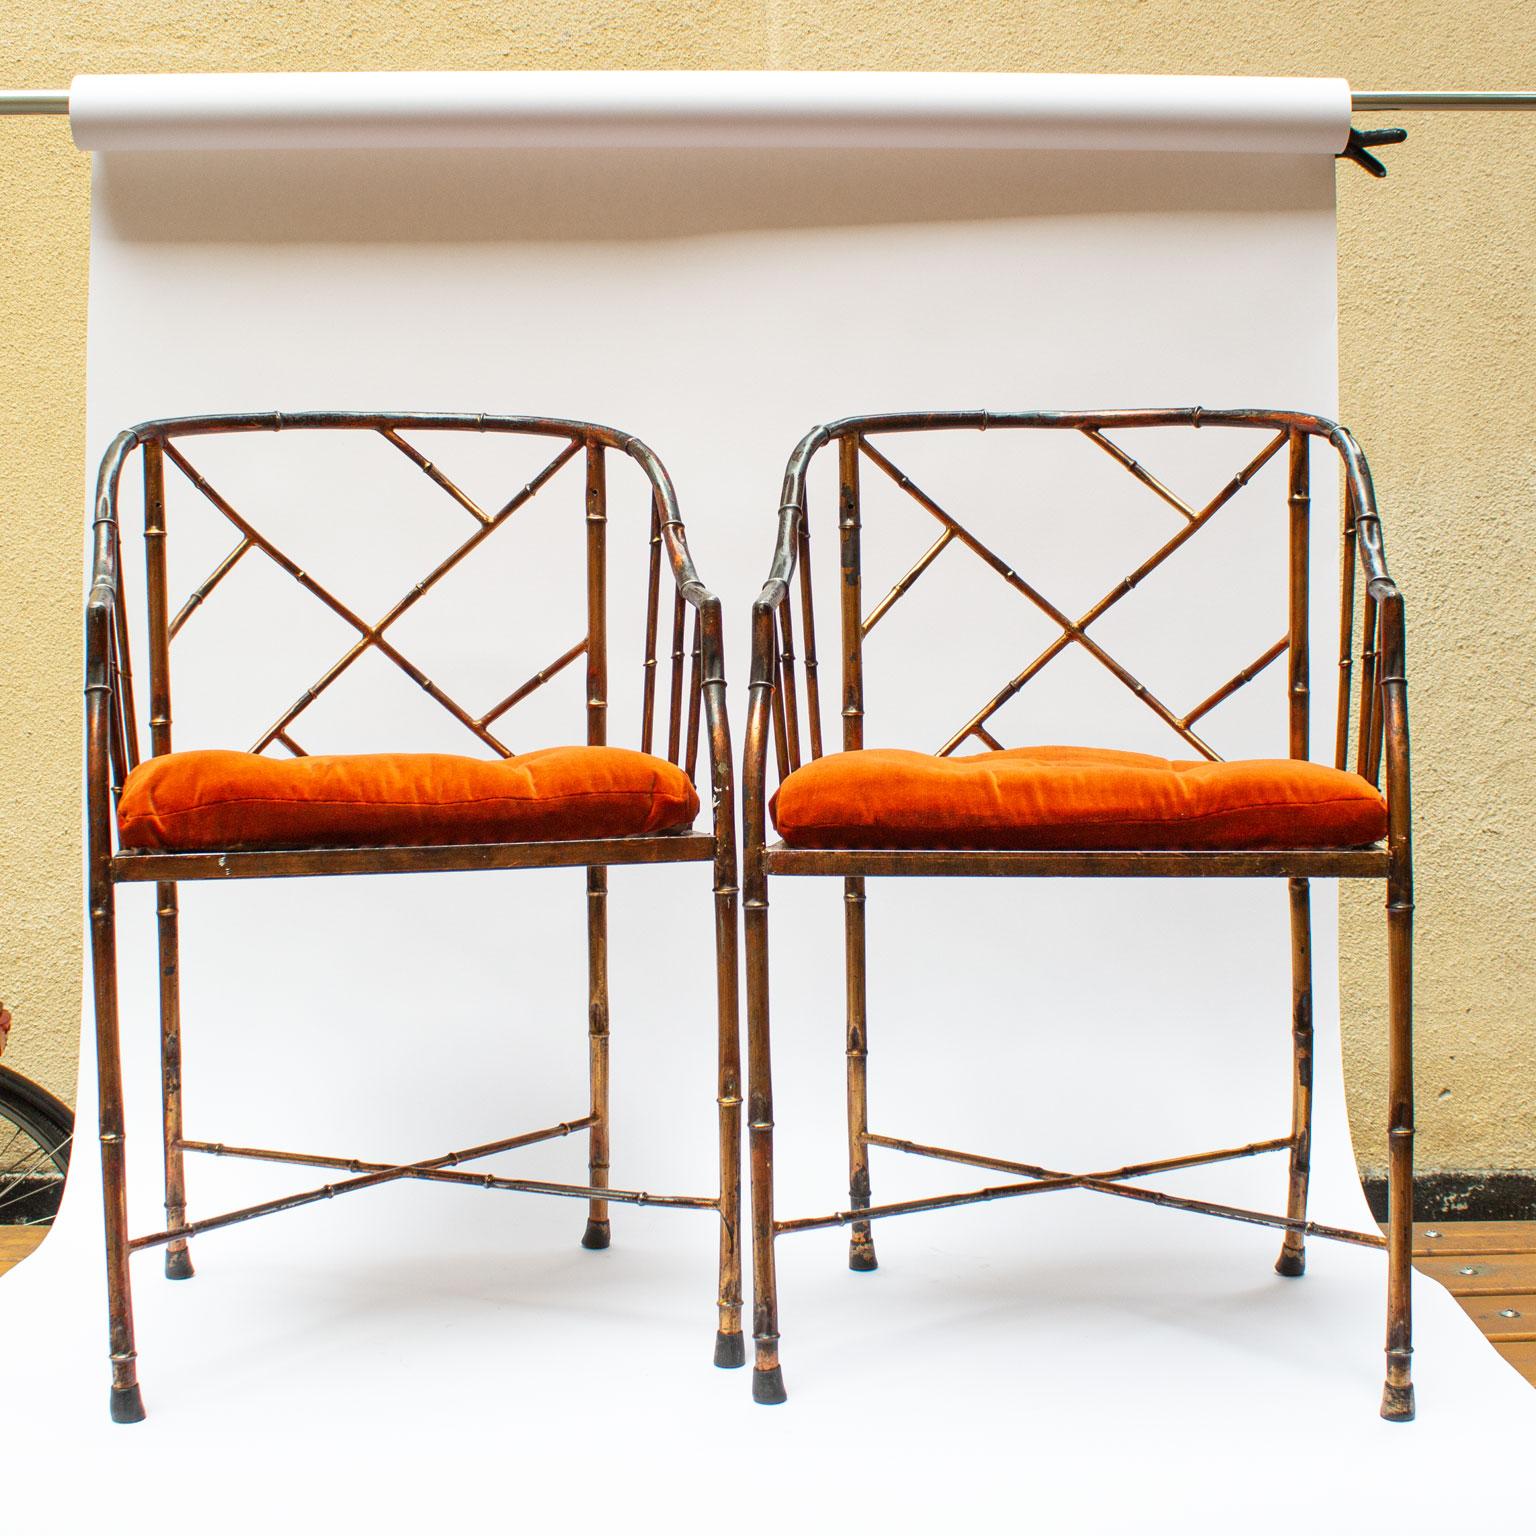 Mid-20th Century Vintage French Midcentury Faux Bamboo Set of Two Side Chair and a Sofa